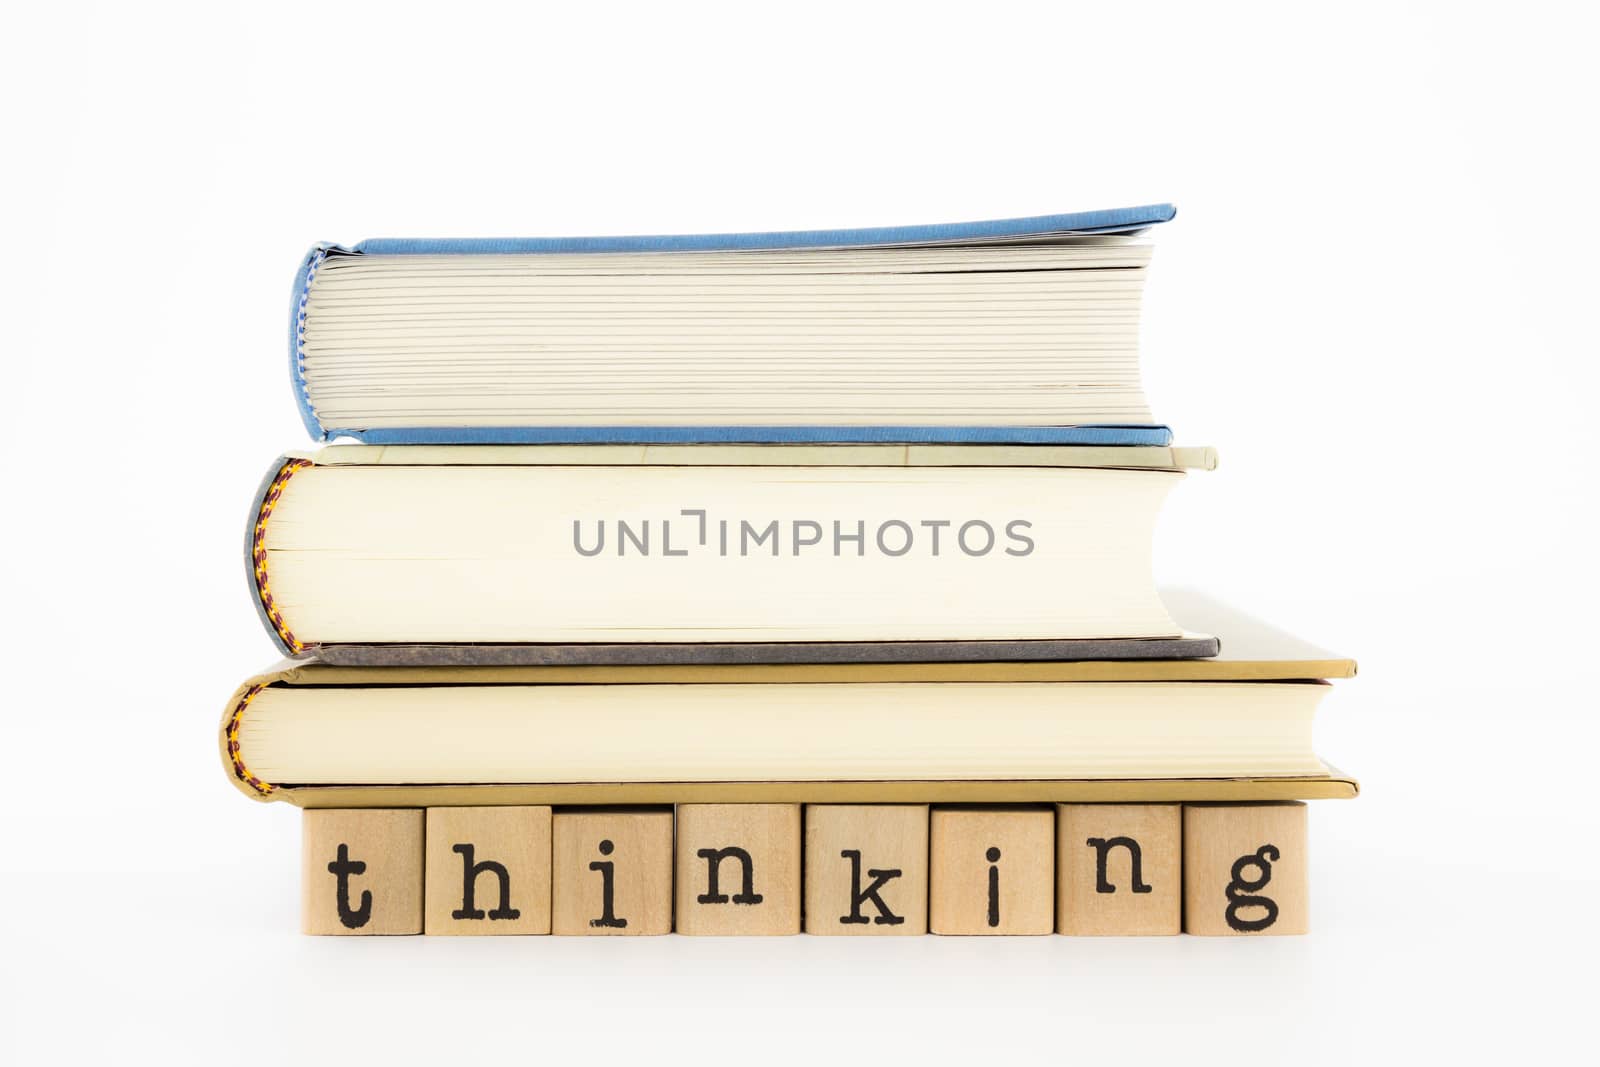 closeup thinking wording and books isolate on white background, concept and idea for business